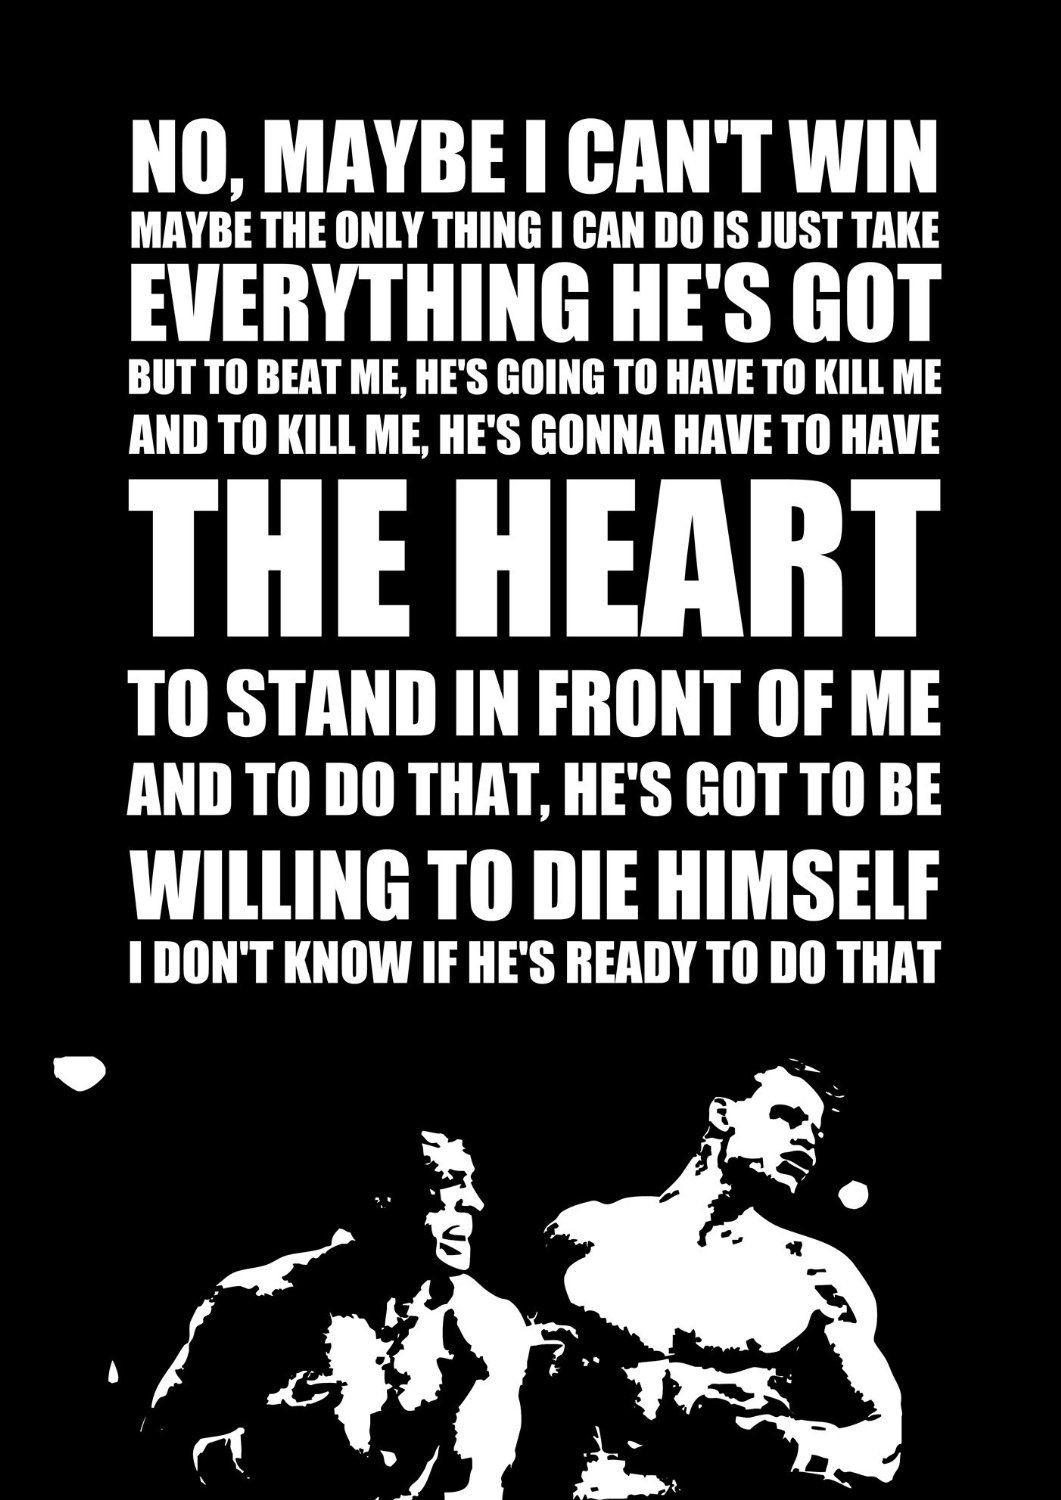 Rocky Motivational Quote
 Rocky 4 Inspired Motivational Inspirational Quote Poster